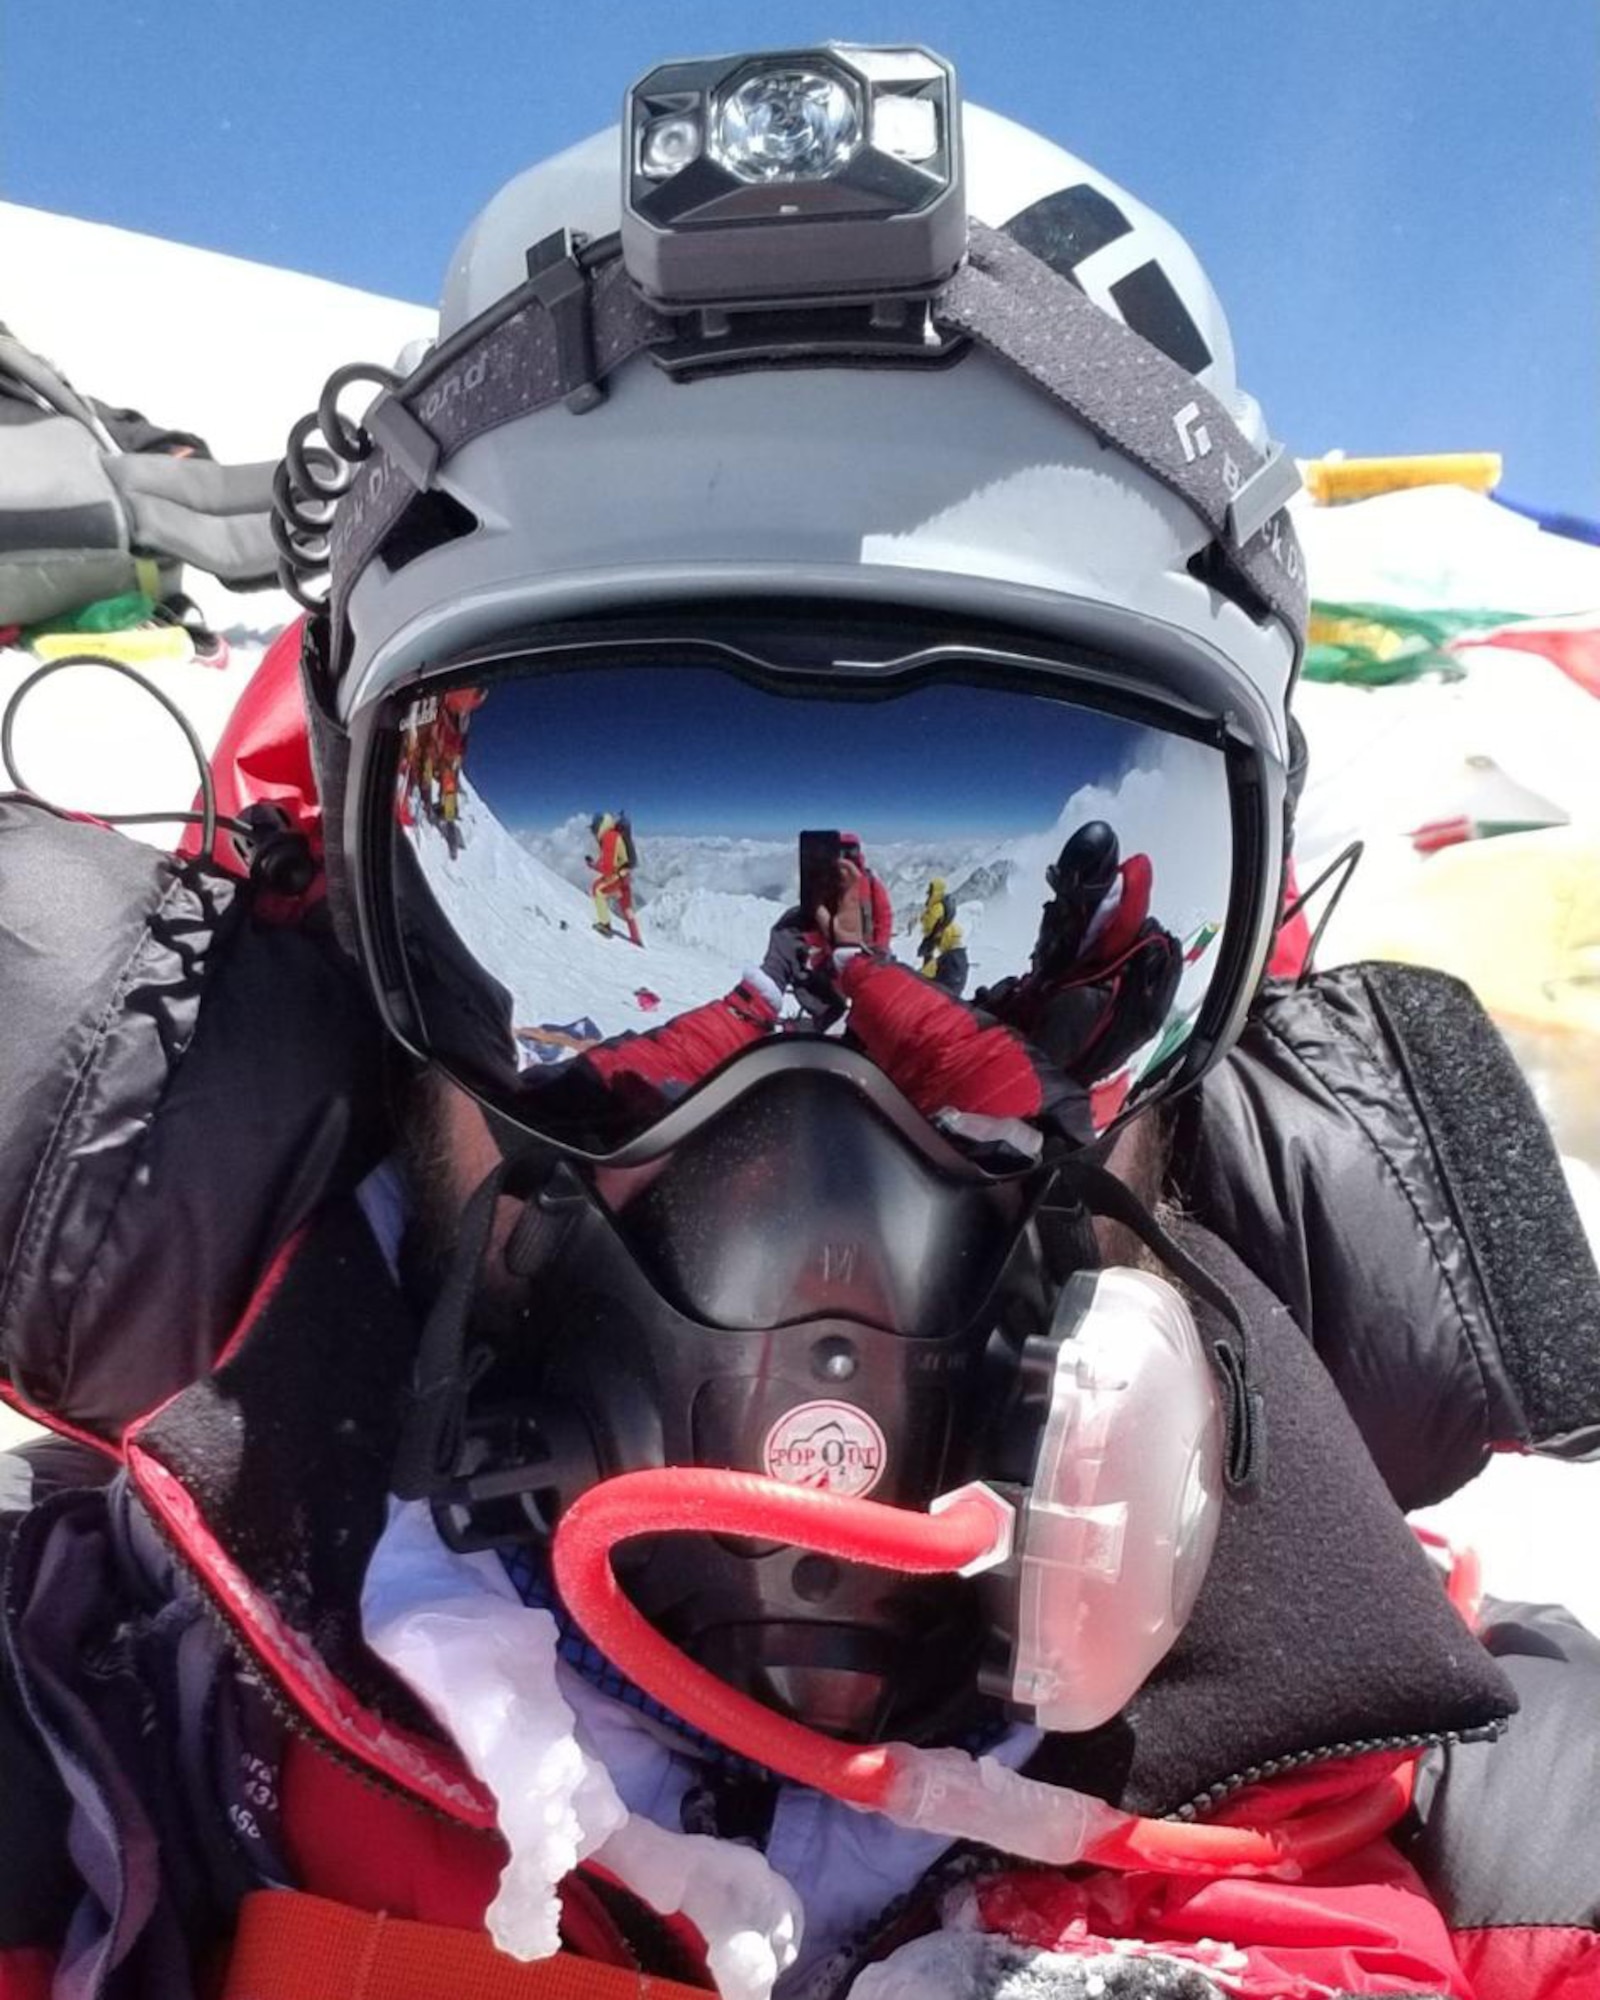 Tech. Sgt. Daniel Wehrly, 931st Maintenance Squadron Technology craftsman, poses for a “selfie” at the top of Mount Everest, May 23, 2019.  Wehrly, a Traditional Reservist, started the summit with two friends and a team of seven local Sherpas to assist them.  The two-month journey began as a personal challenge for Wehrly, an active climber who had already scaled a number of mountains in the U.S.  (Courtesy photo)